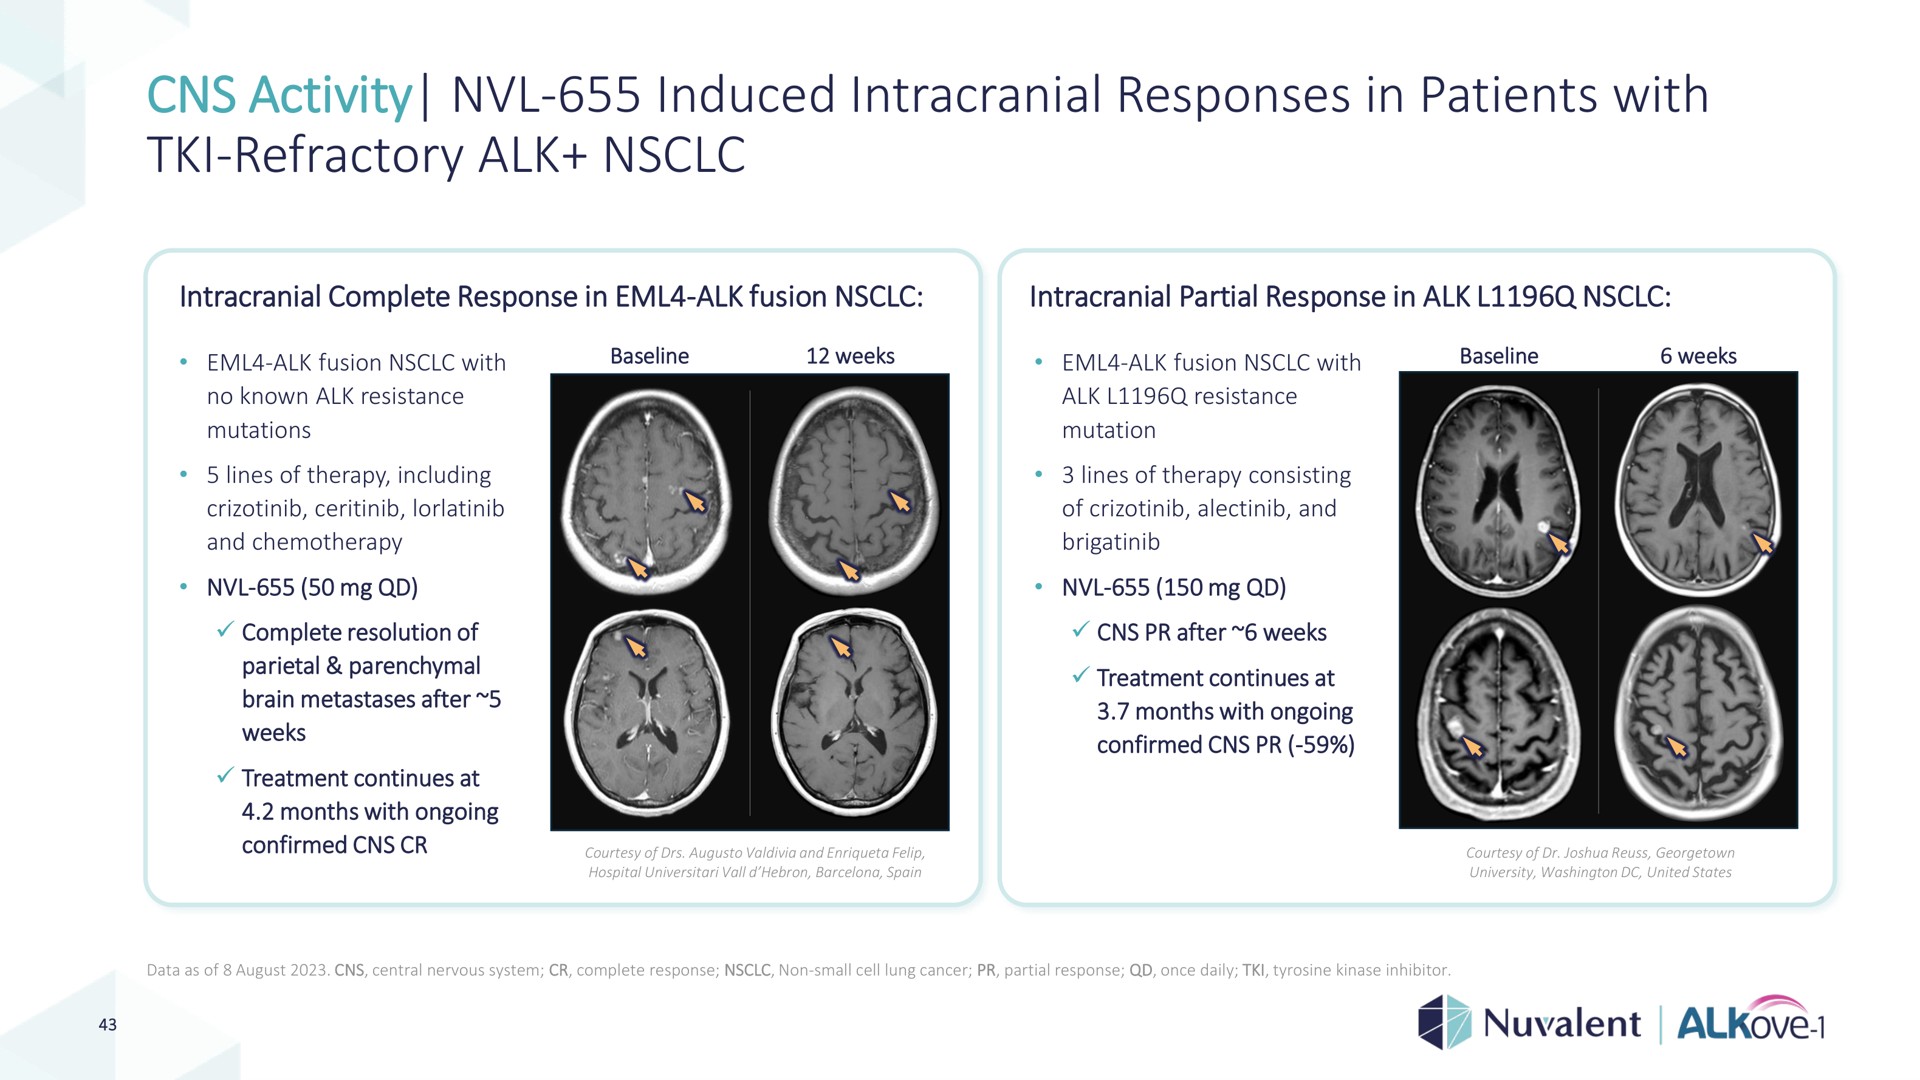 activity induced intracranial responses in patients with refractory alk | Nuvalent